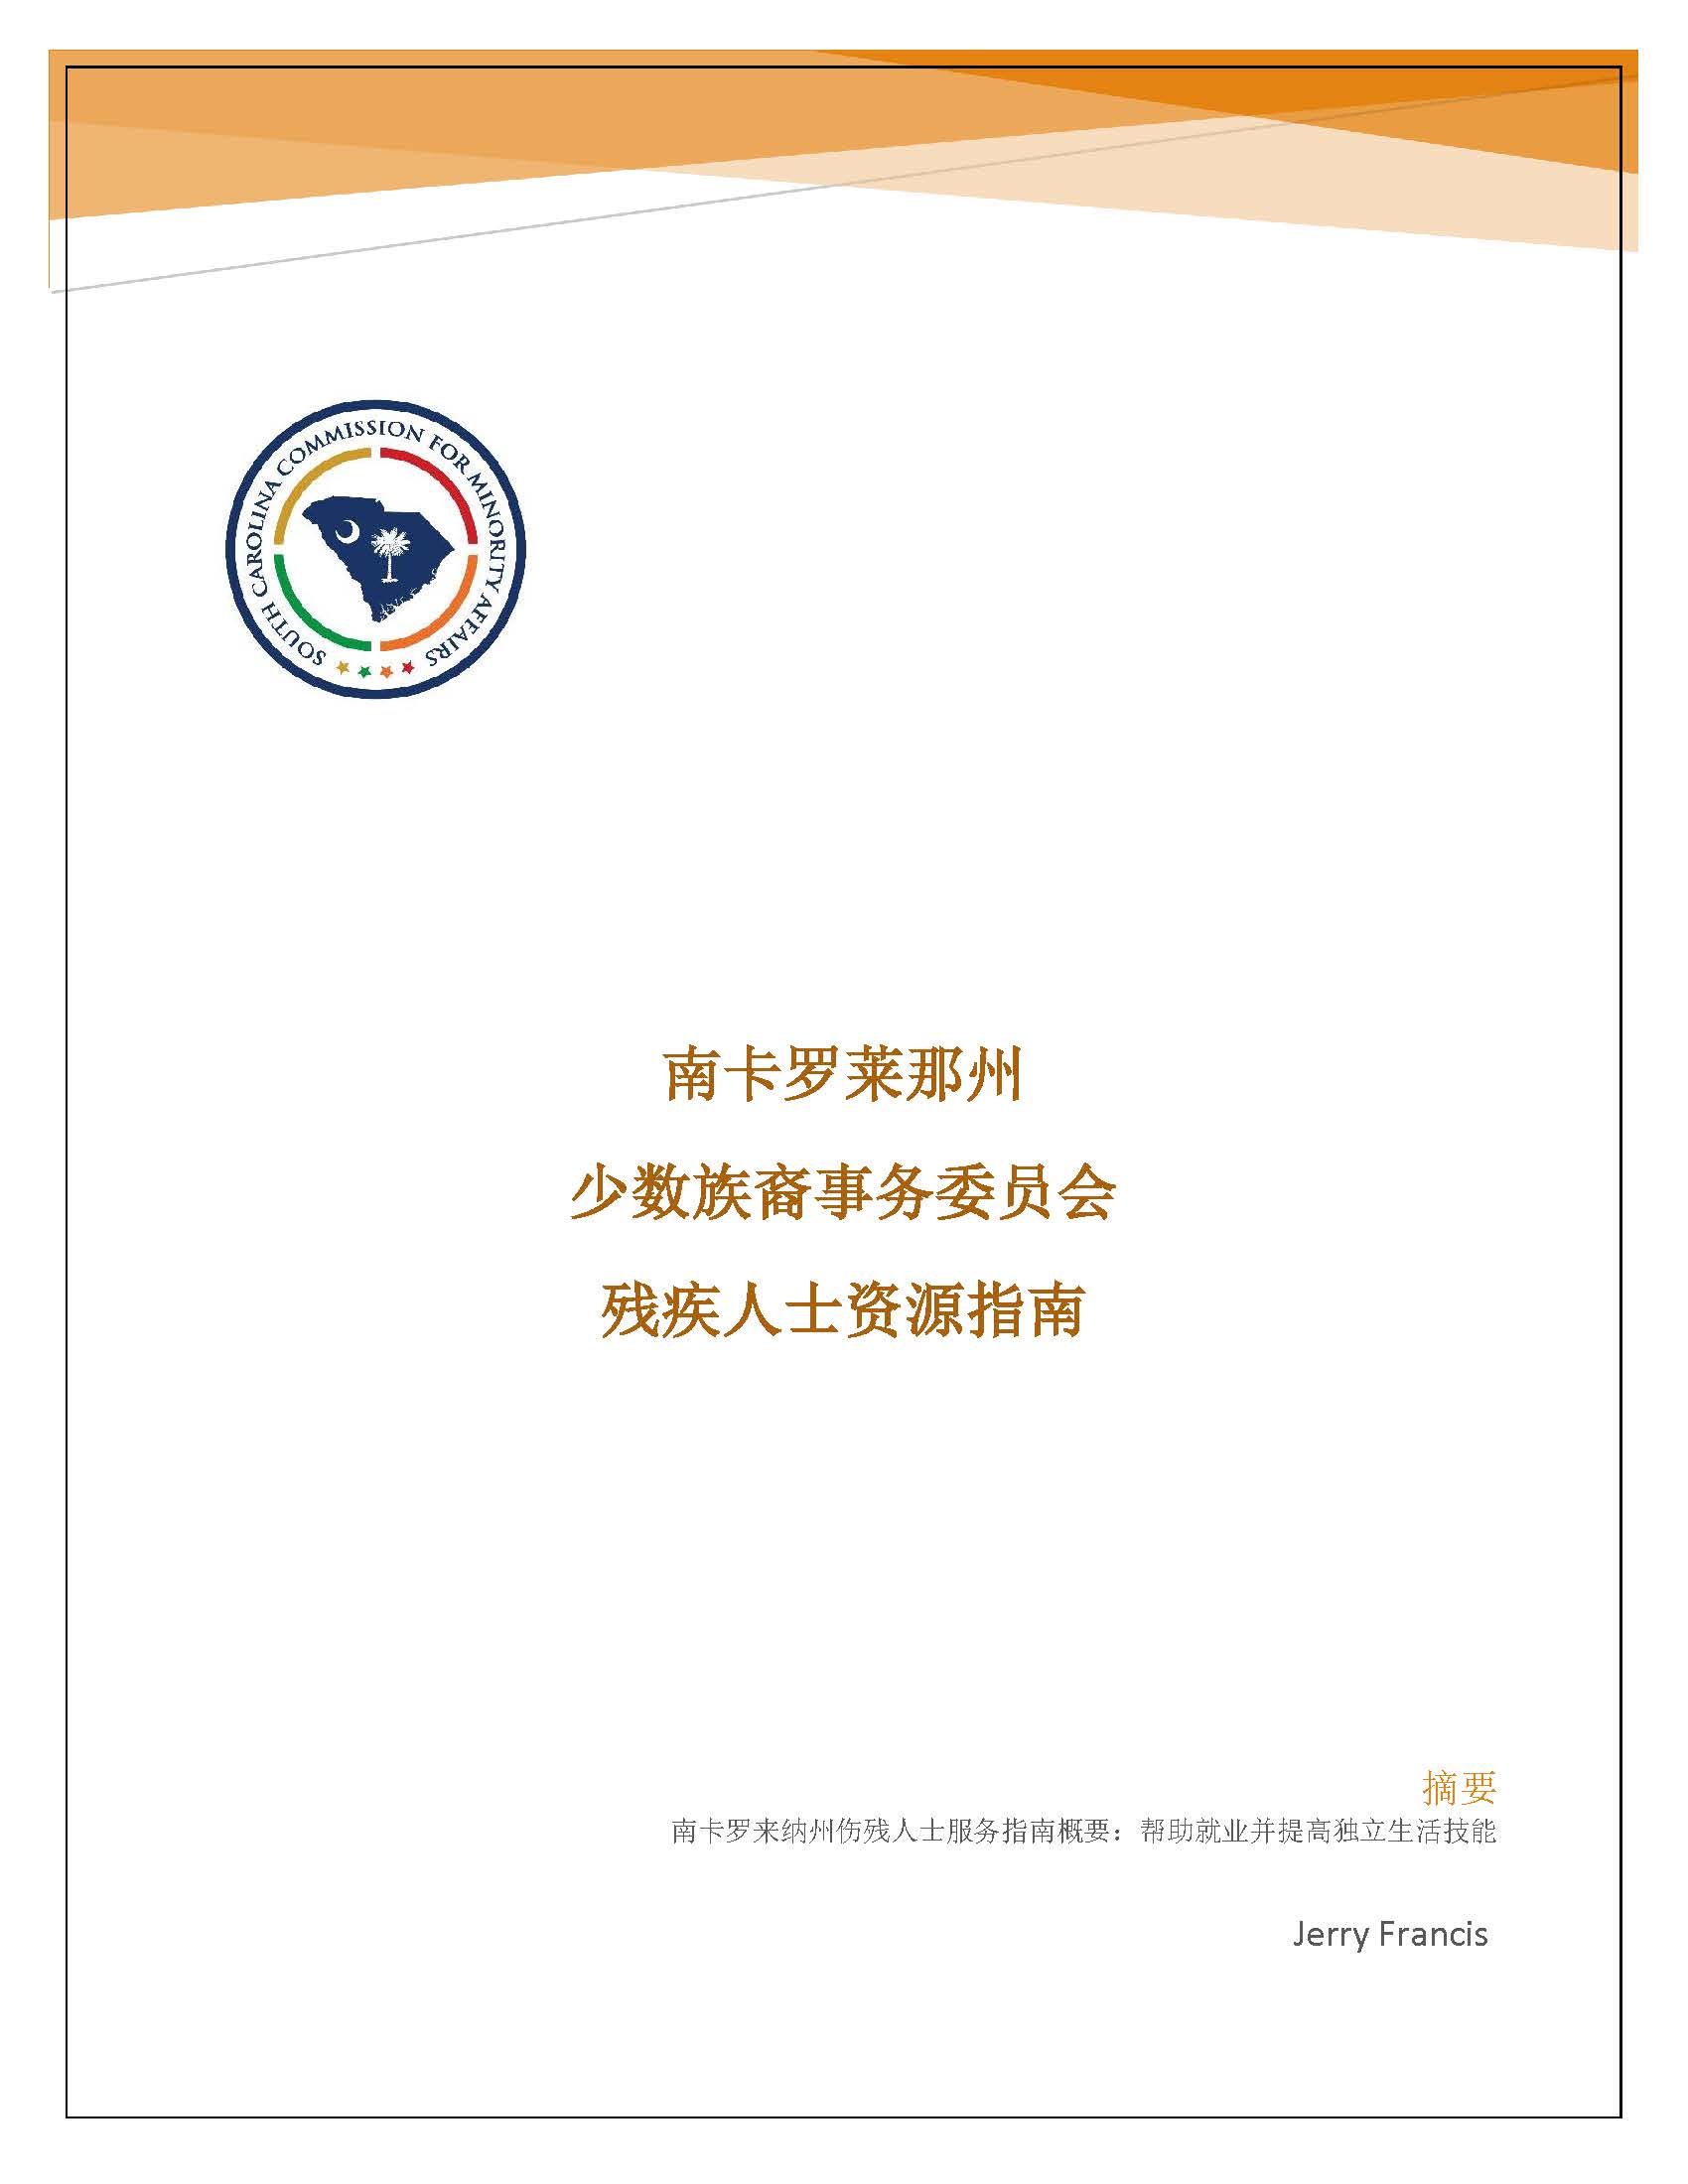 SCCFMA Disability Resource Guide in Chinese